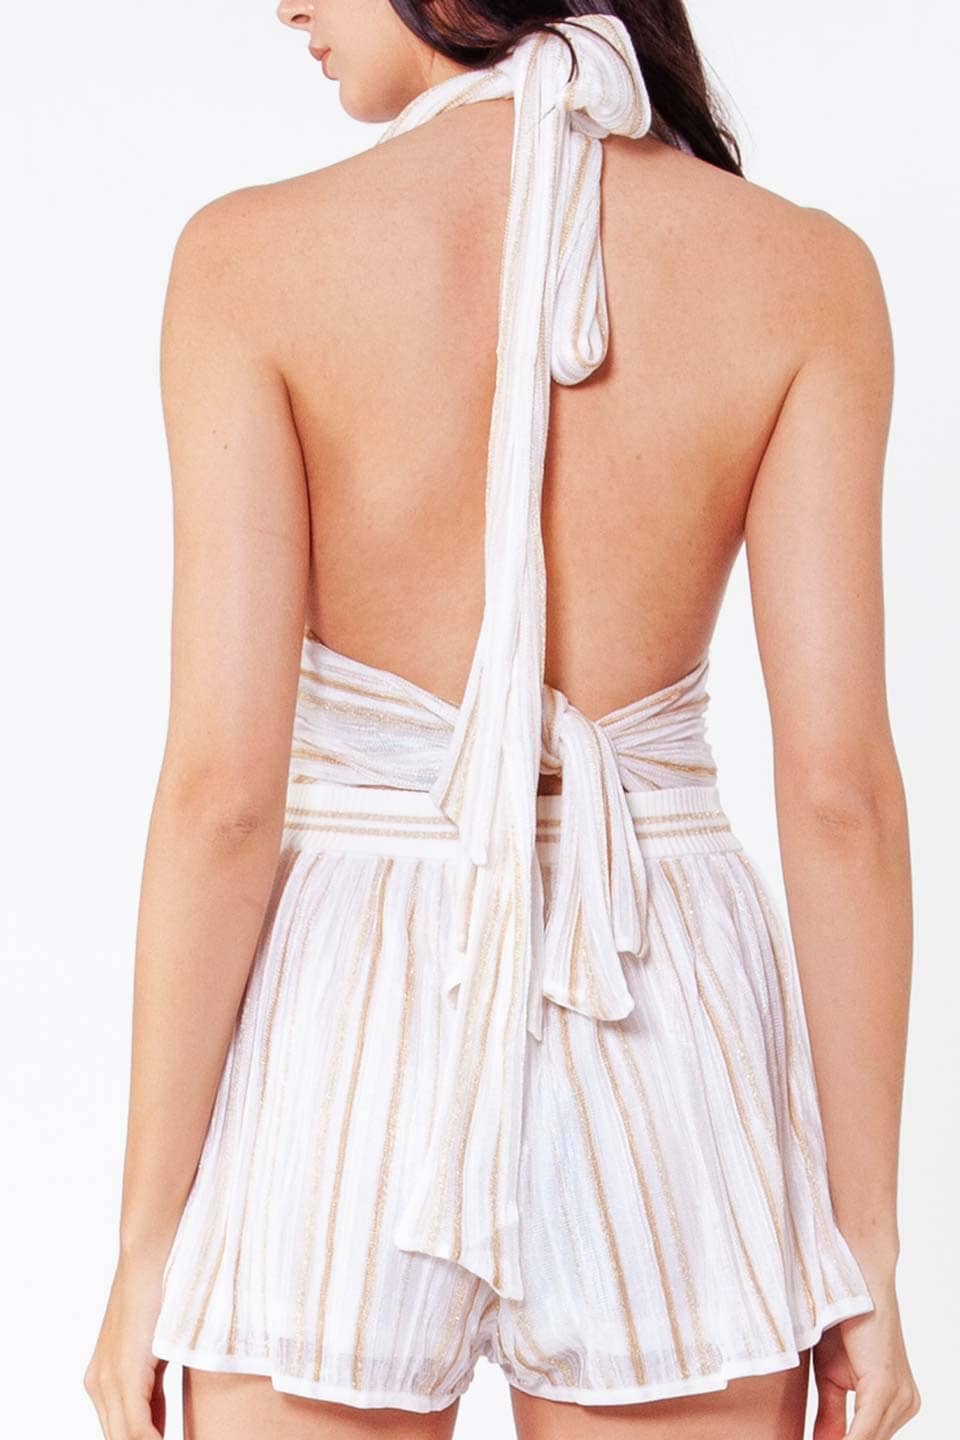 Thumbnail for Product gallery 3, Fashion designer Halter top in white and gold color, back details on fabric